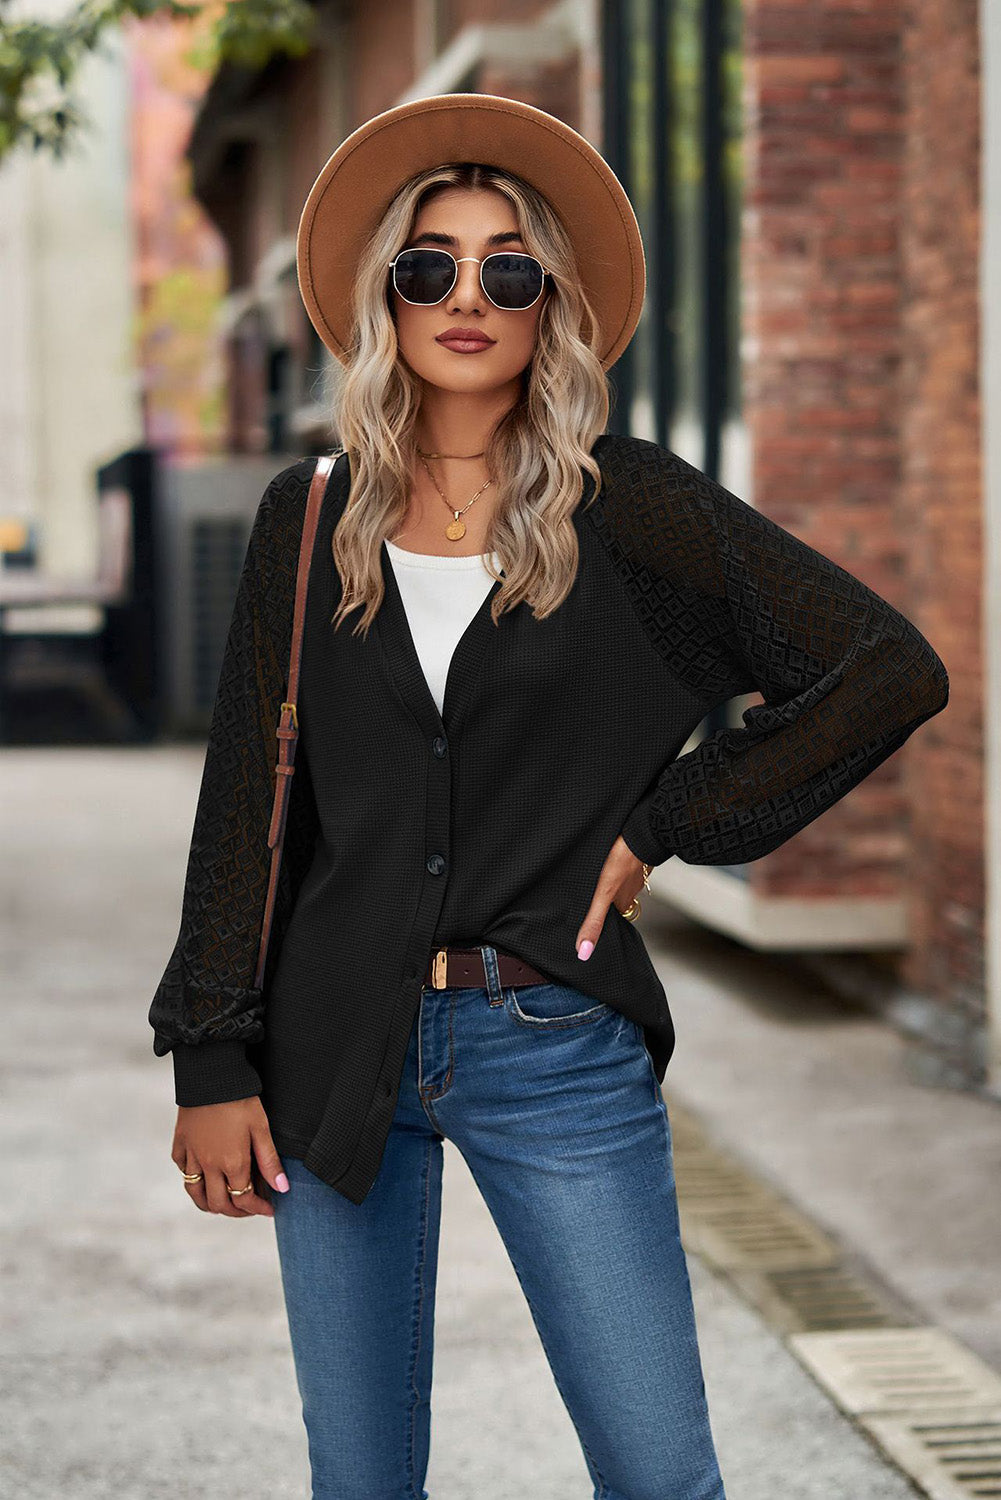 Waffled Knit Lace Long Sleeve Buttoned Cardigan